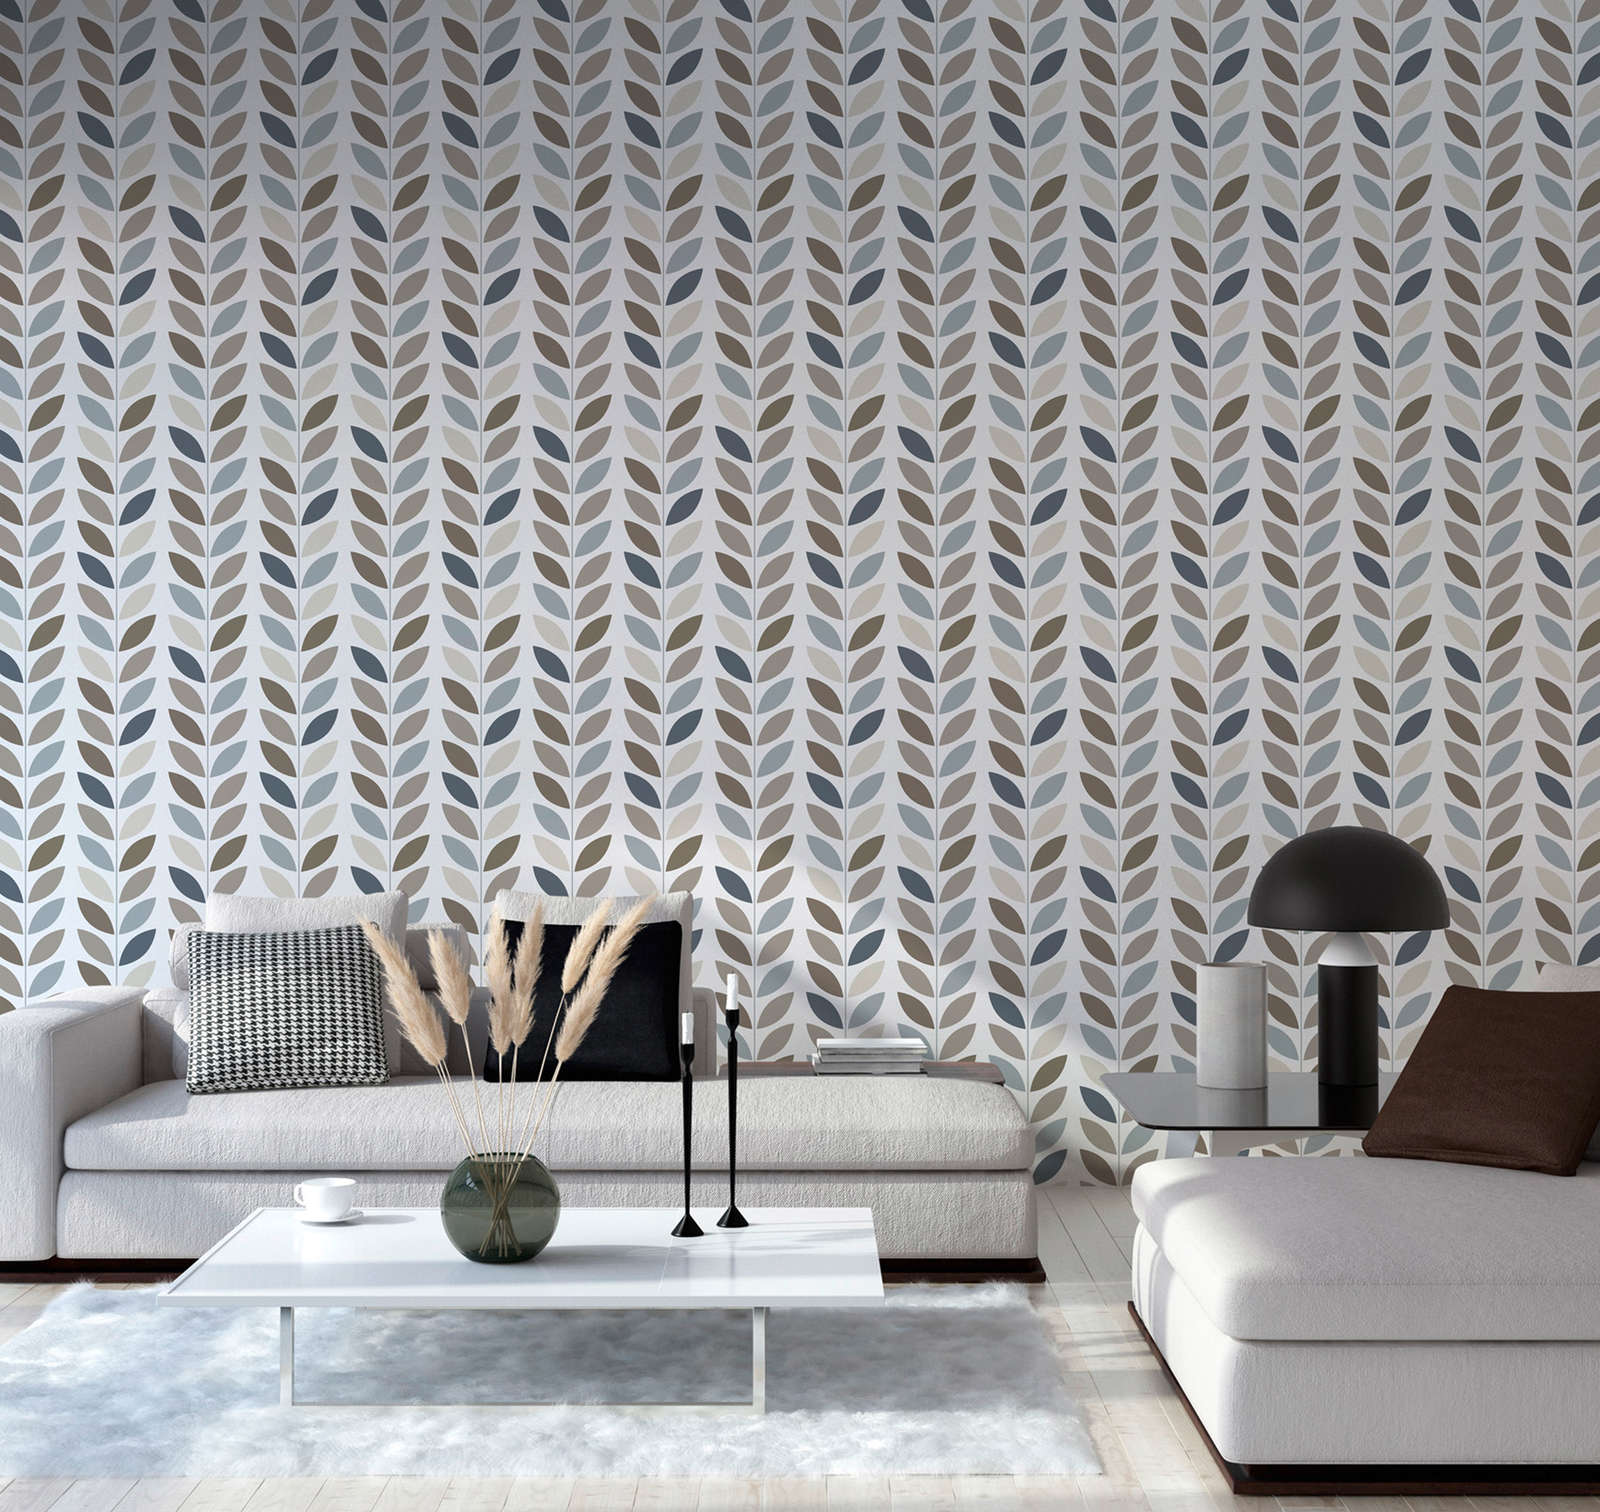             Retro style non-woven wallpaper with leaf pattern - cream, blue, brown
        